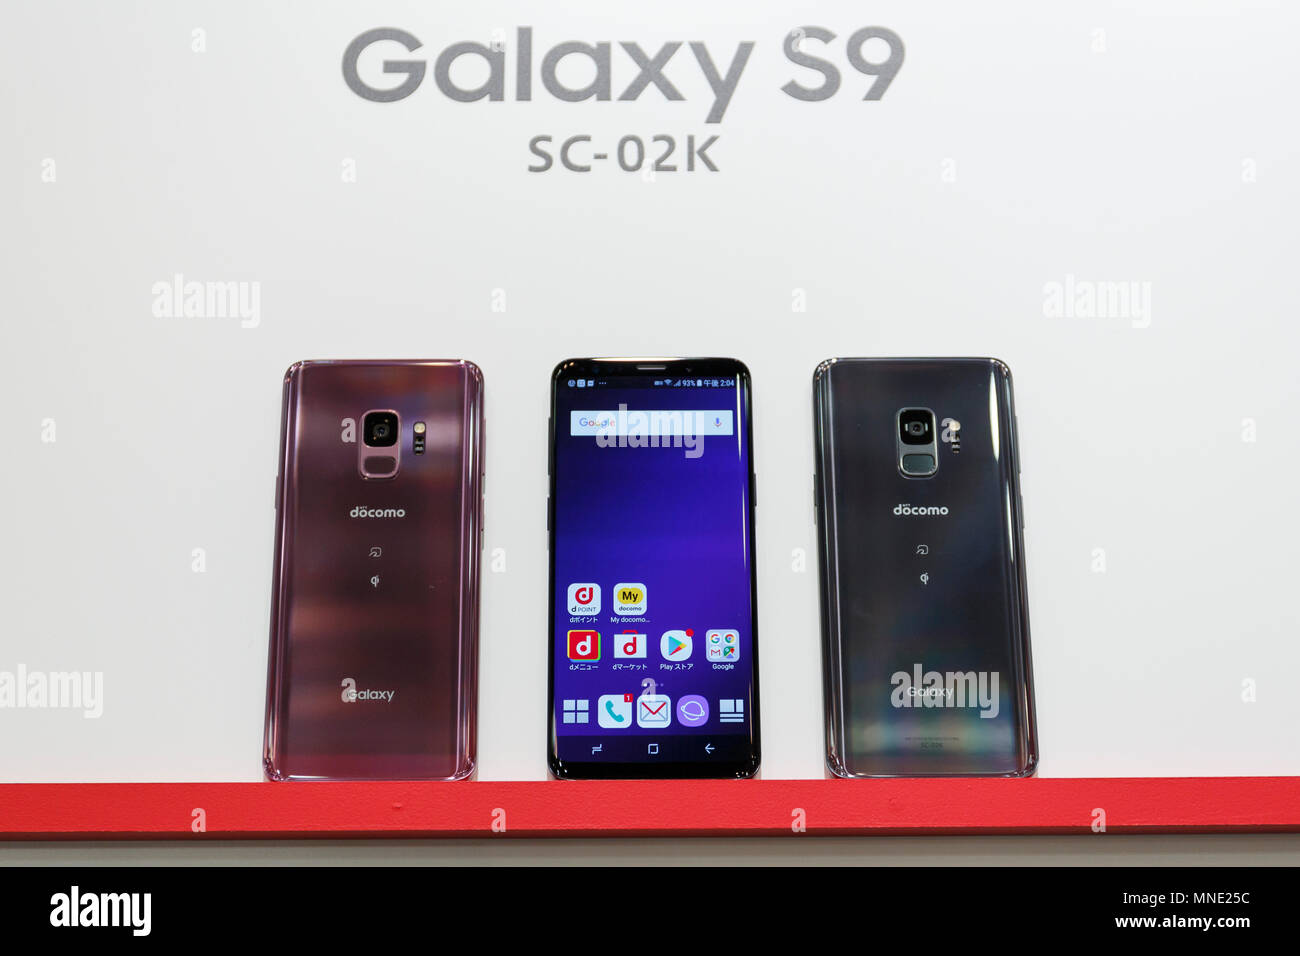 DOMOCO's new smartphone Galaxy S9 (SC-02K) on display during a